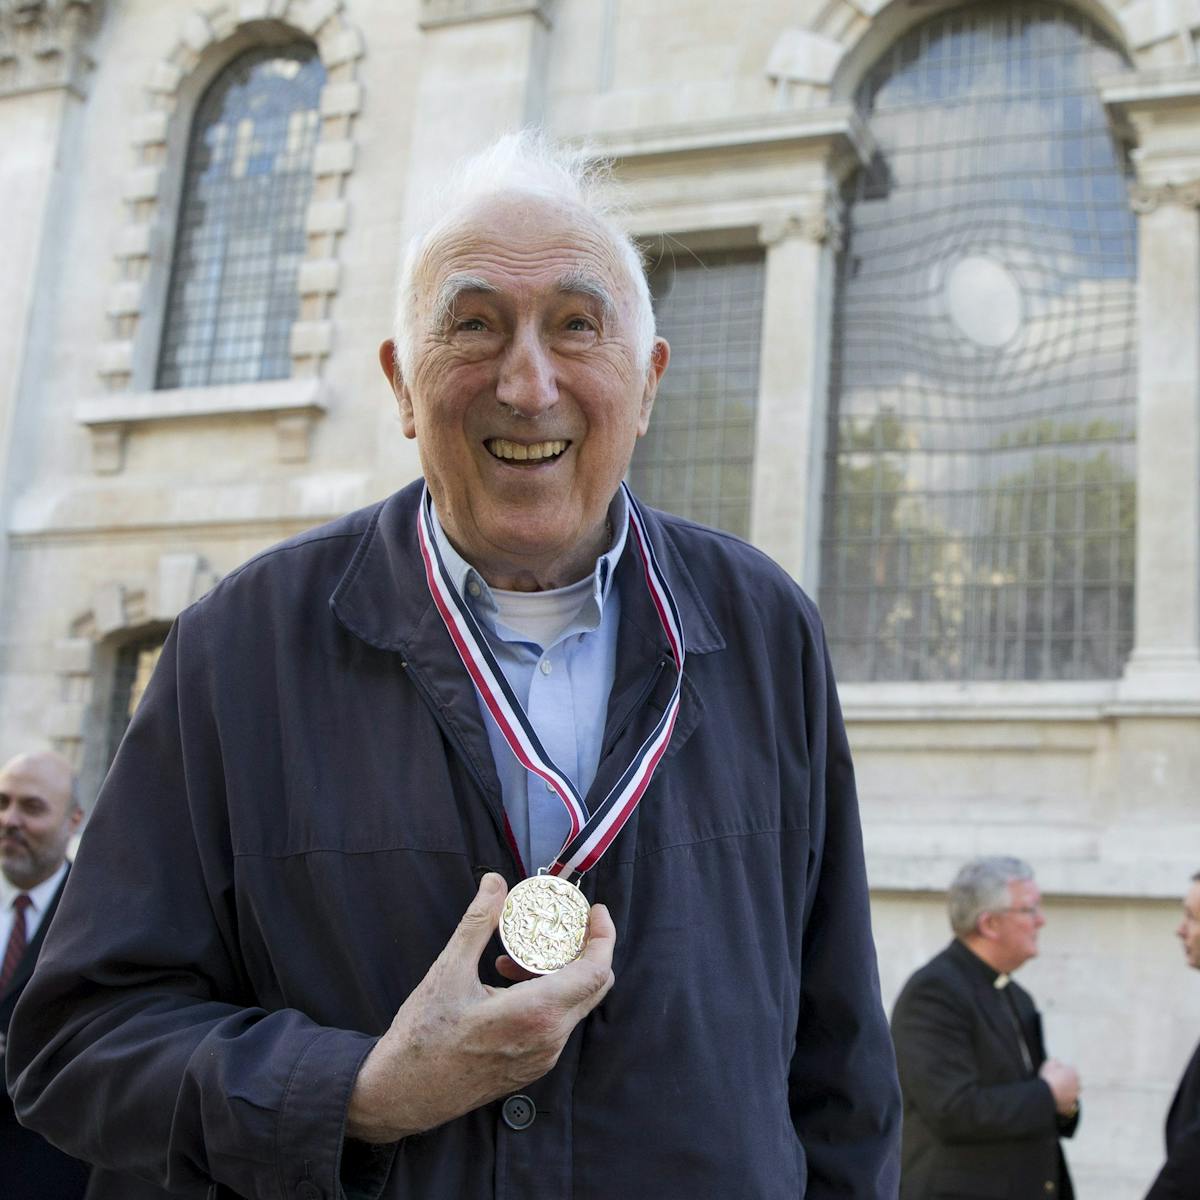 I thought Catholic humanist Jean Vanier a hero. Now I'm wrestling with his coercive